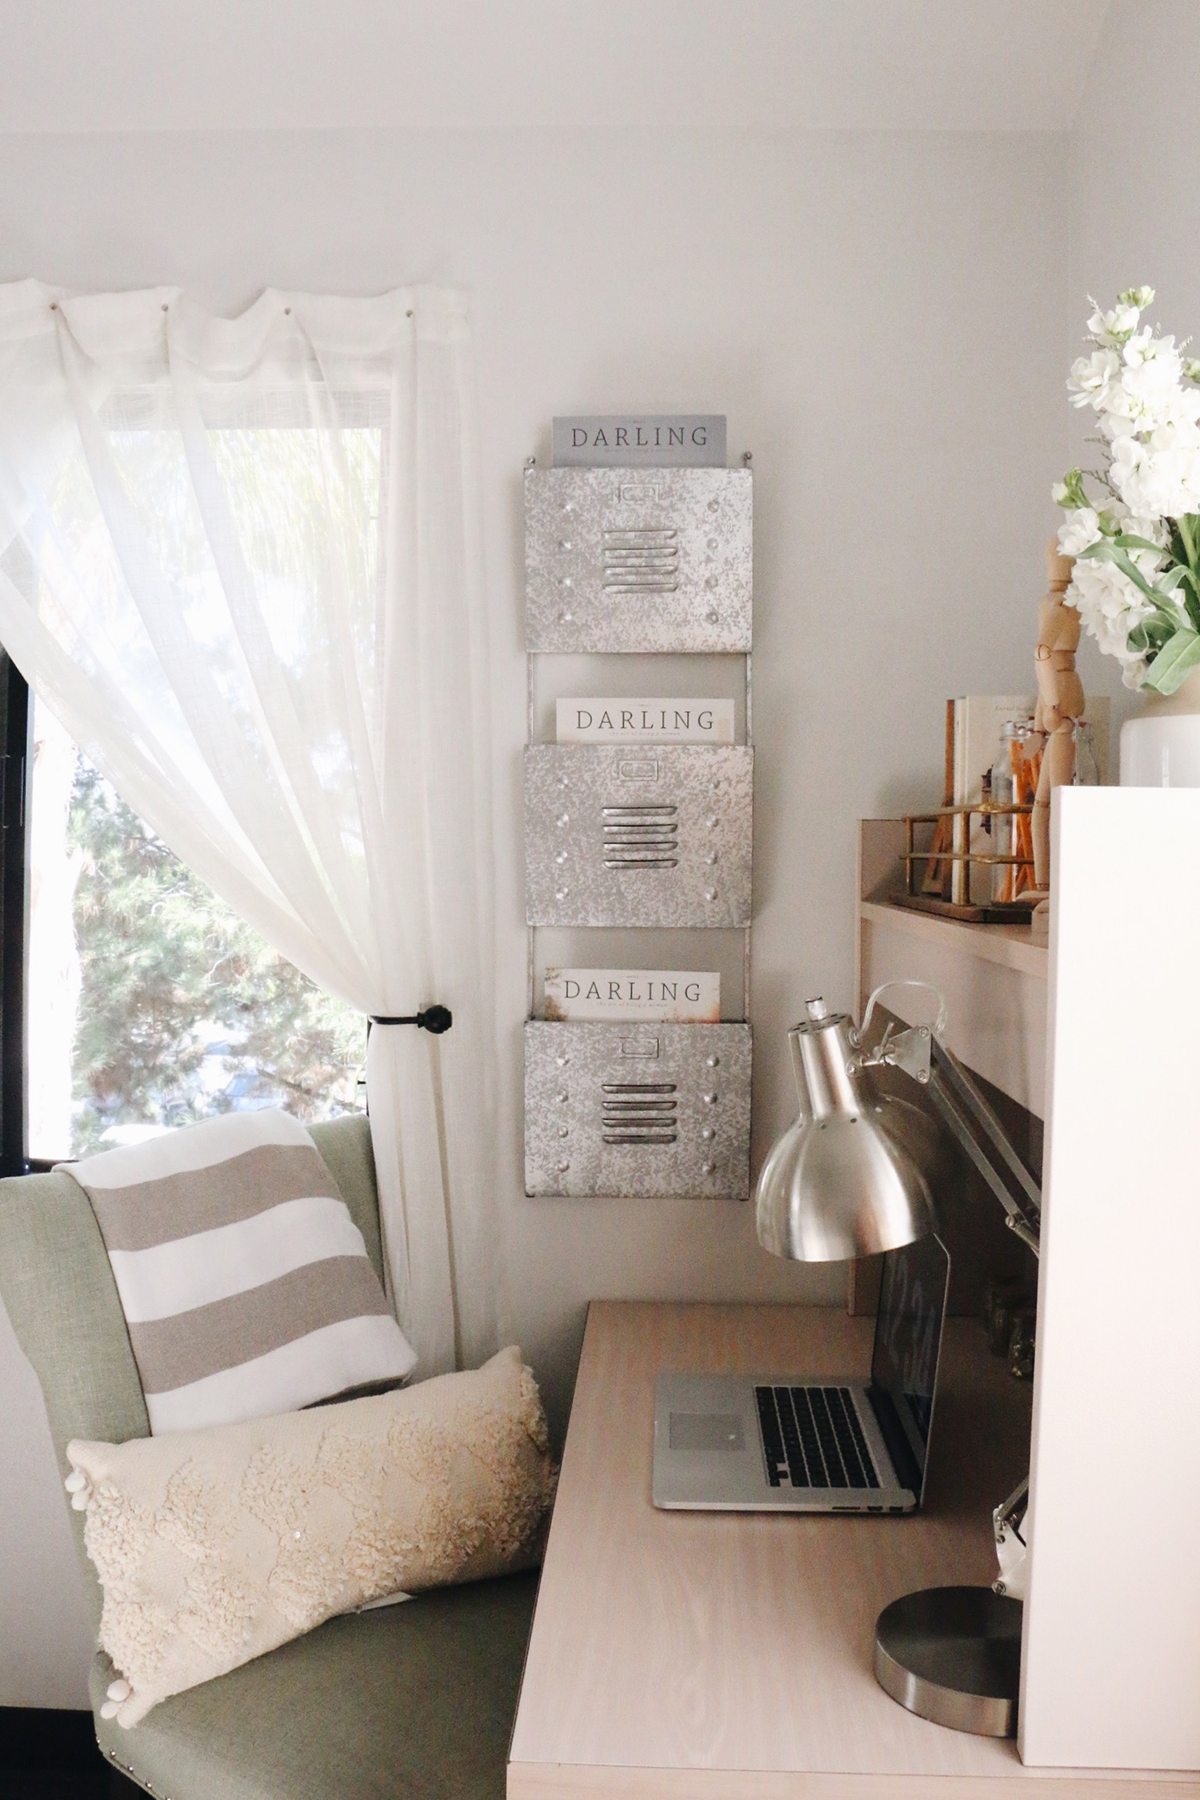 How to Style Your Dorm So That It Doesn't Feel Like a Dorm | DARLING